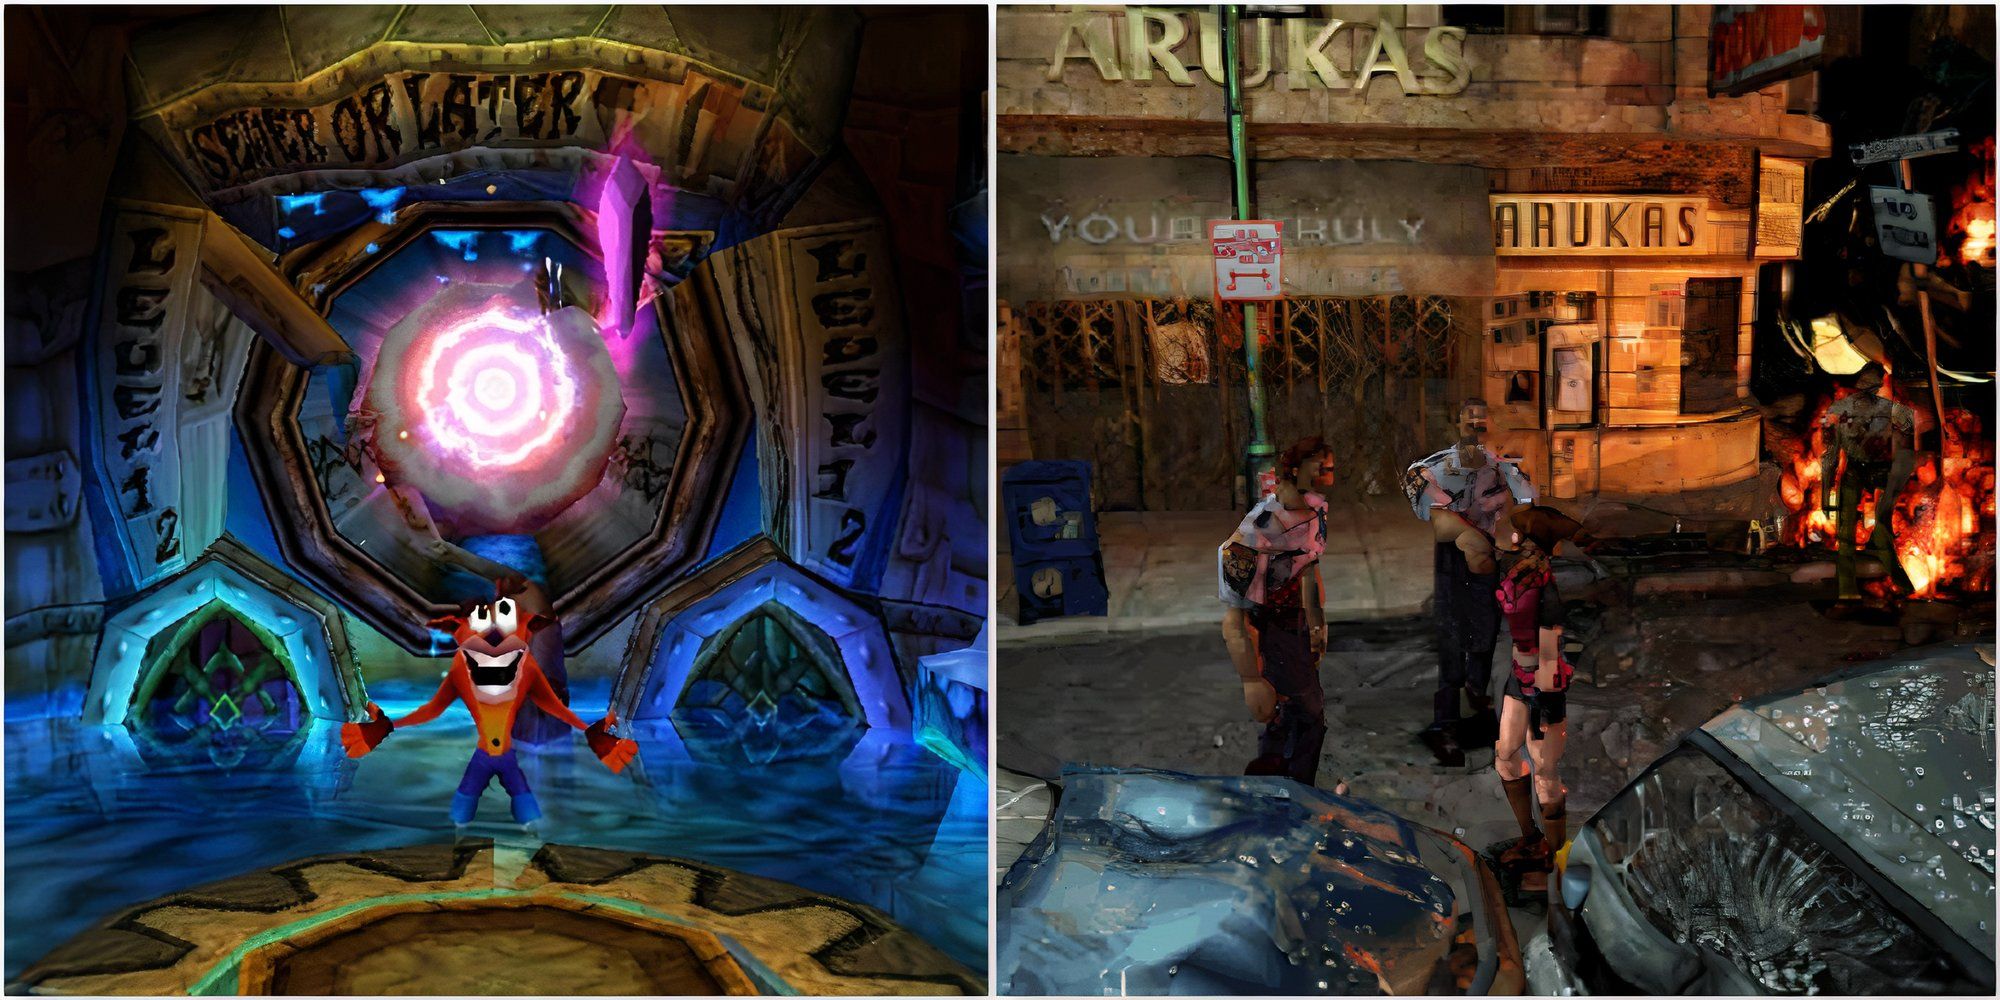 Getting a crystal in Crash Bandicoot 2 Cortex Strikes Back and Shooting zombies as Claire in Resident Evil 2